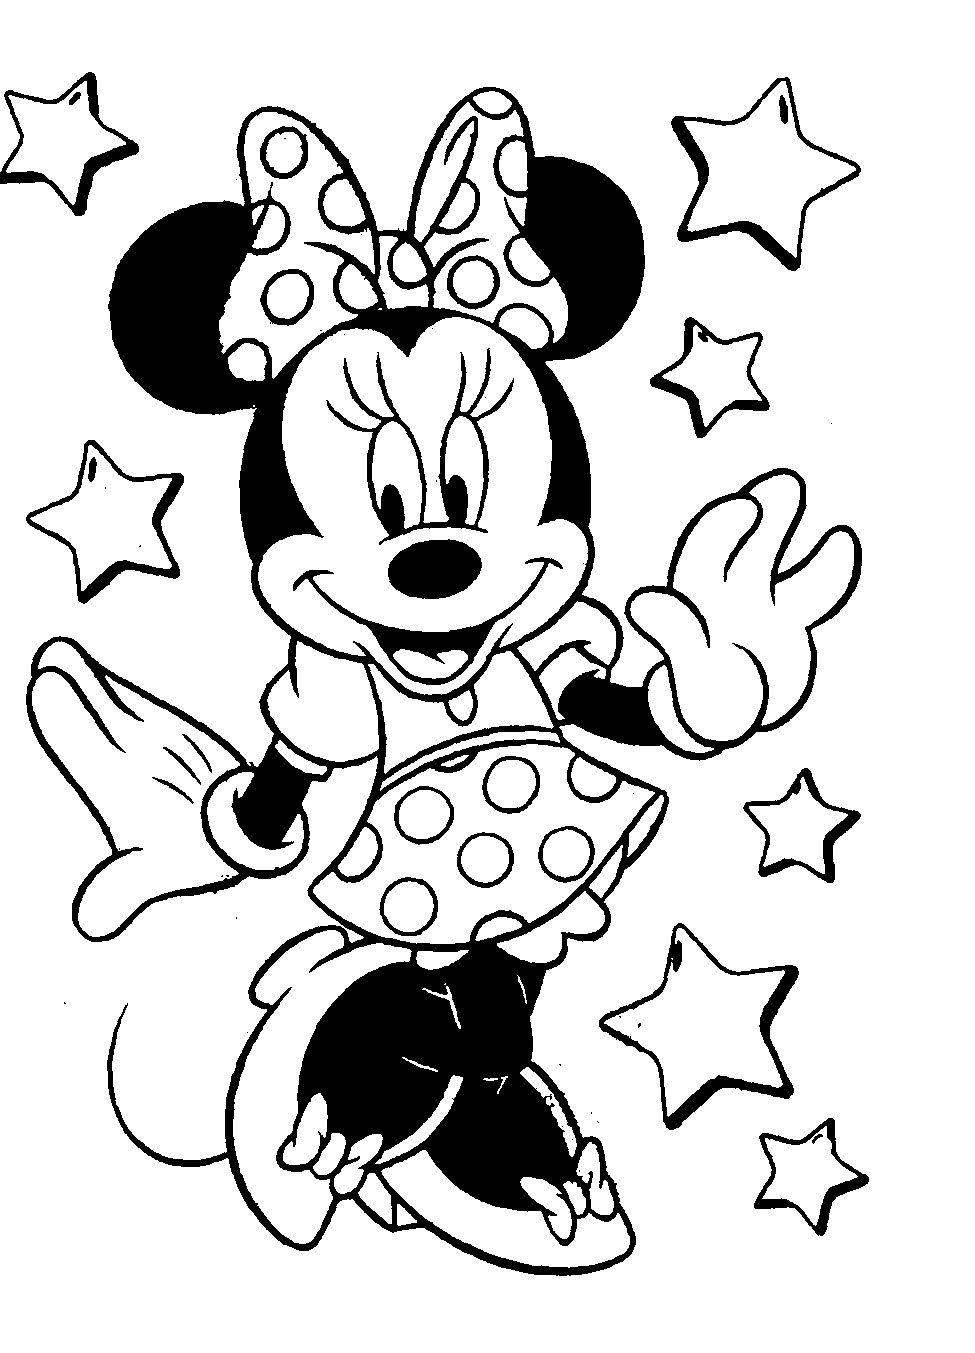 Minnie Mouse Printable Coloring Pages
 DISNEY COLORING PAGES